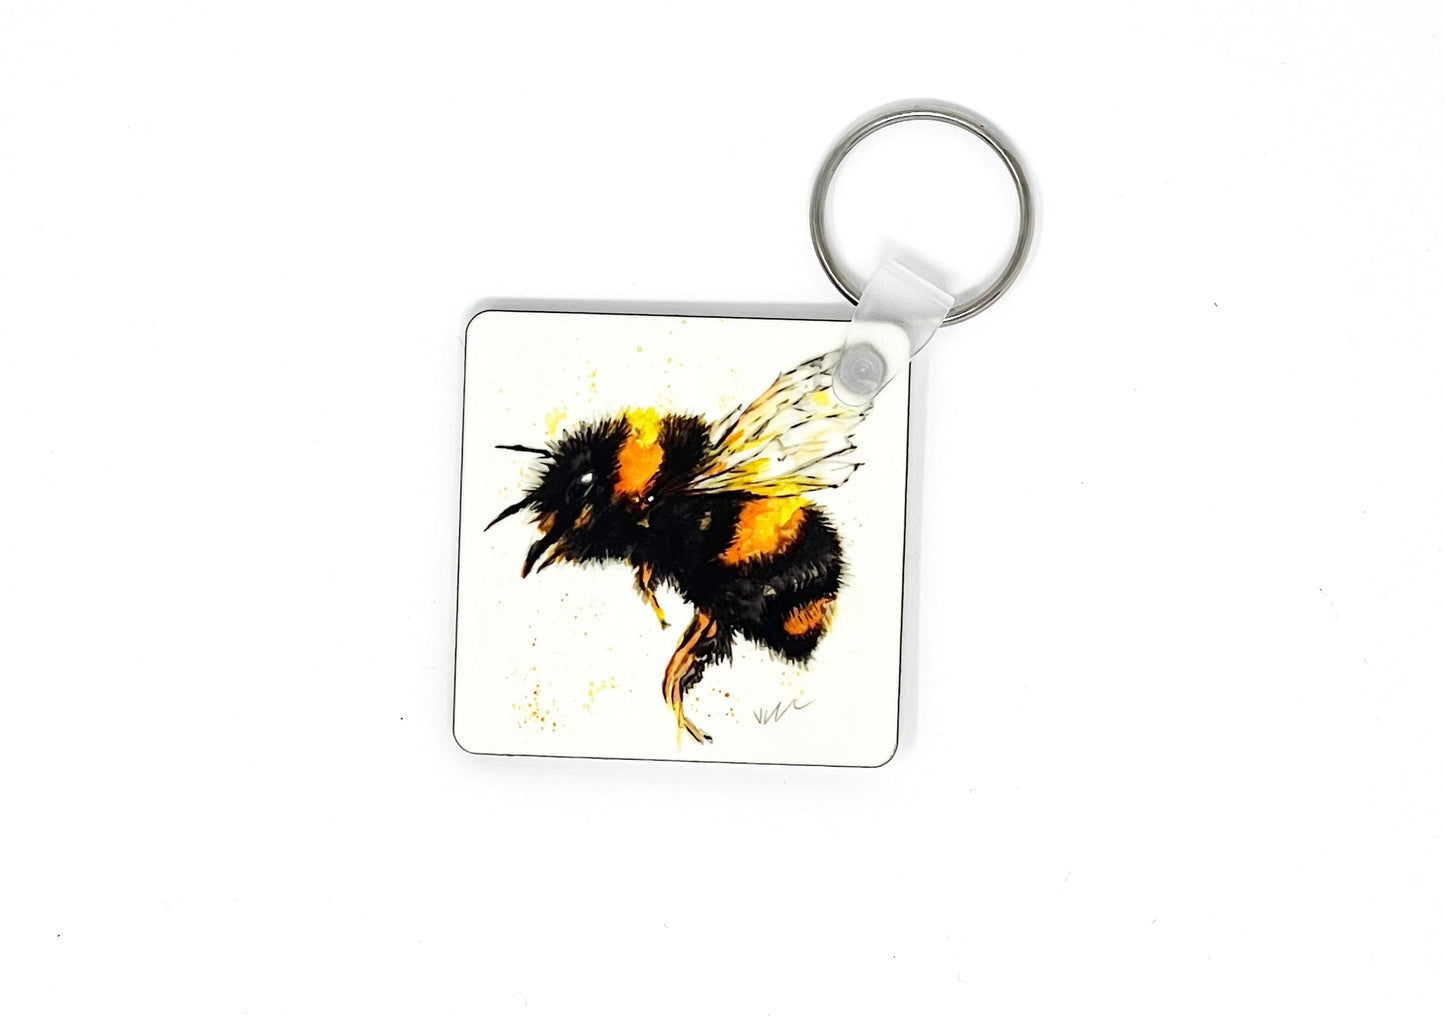 Betty the Bee Keyring